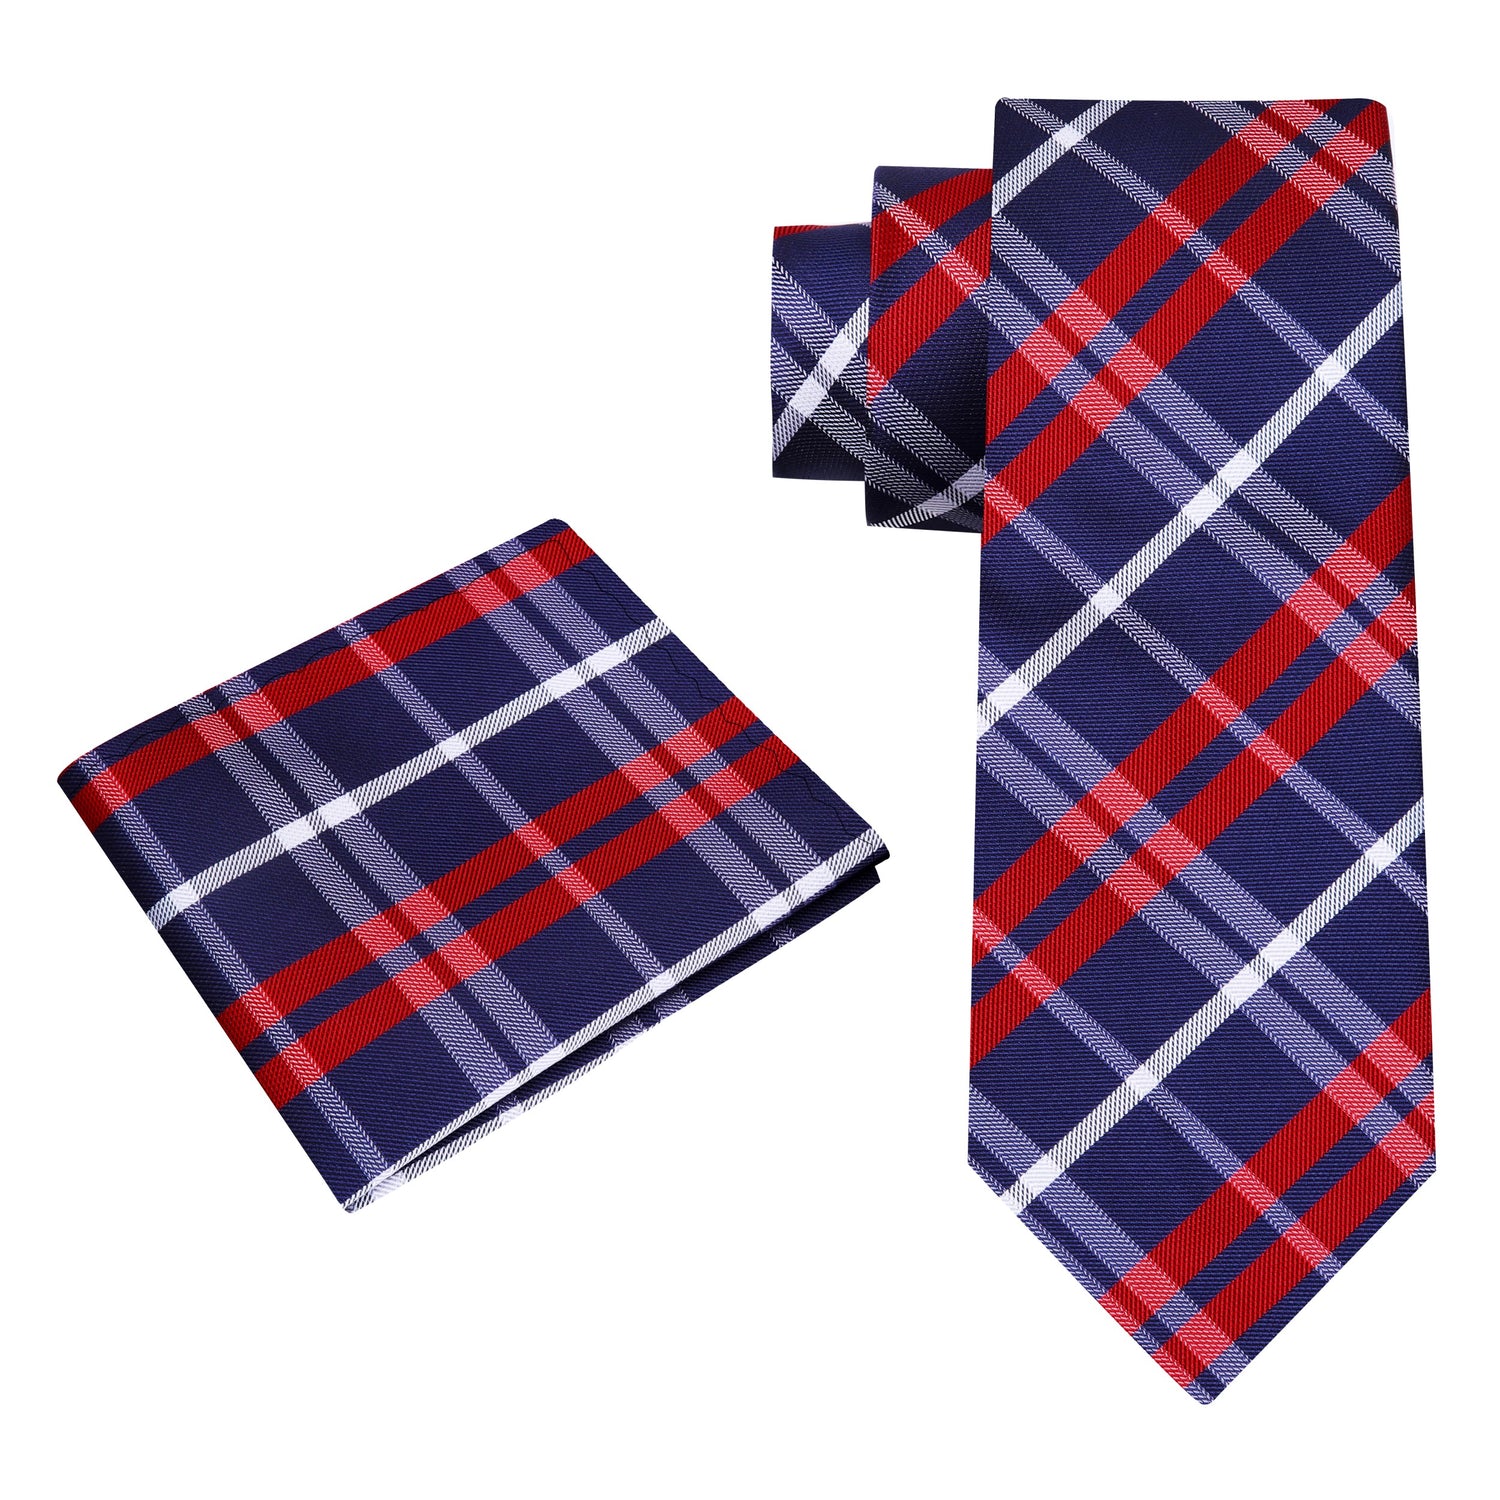 Alt view: Blue, Red and White Giza Plaid Tie and Square